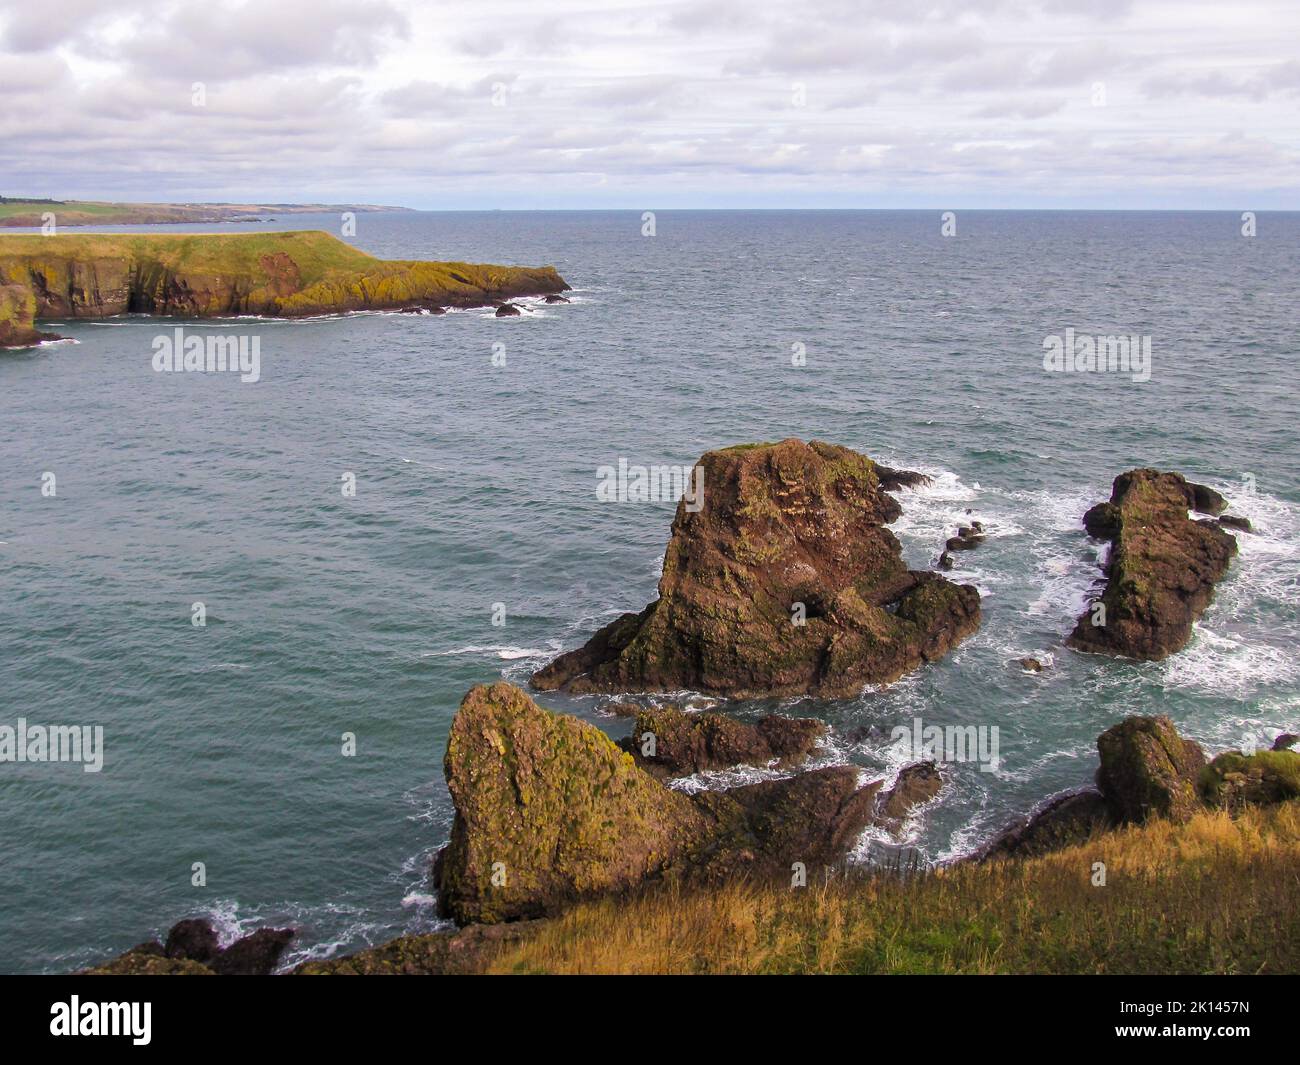 View over the North Sea with the cliffs of the rugged Scottish coastline in the foreground. The Coastal route along the North-Eastern Scottish coast i Stock Photo